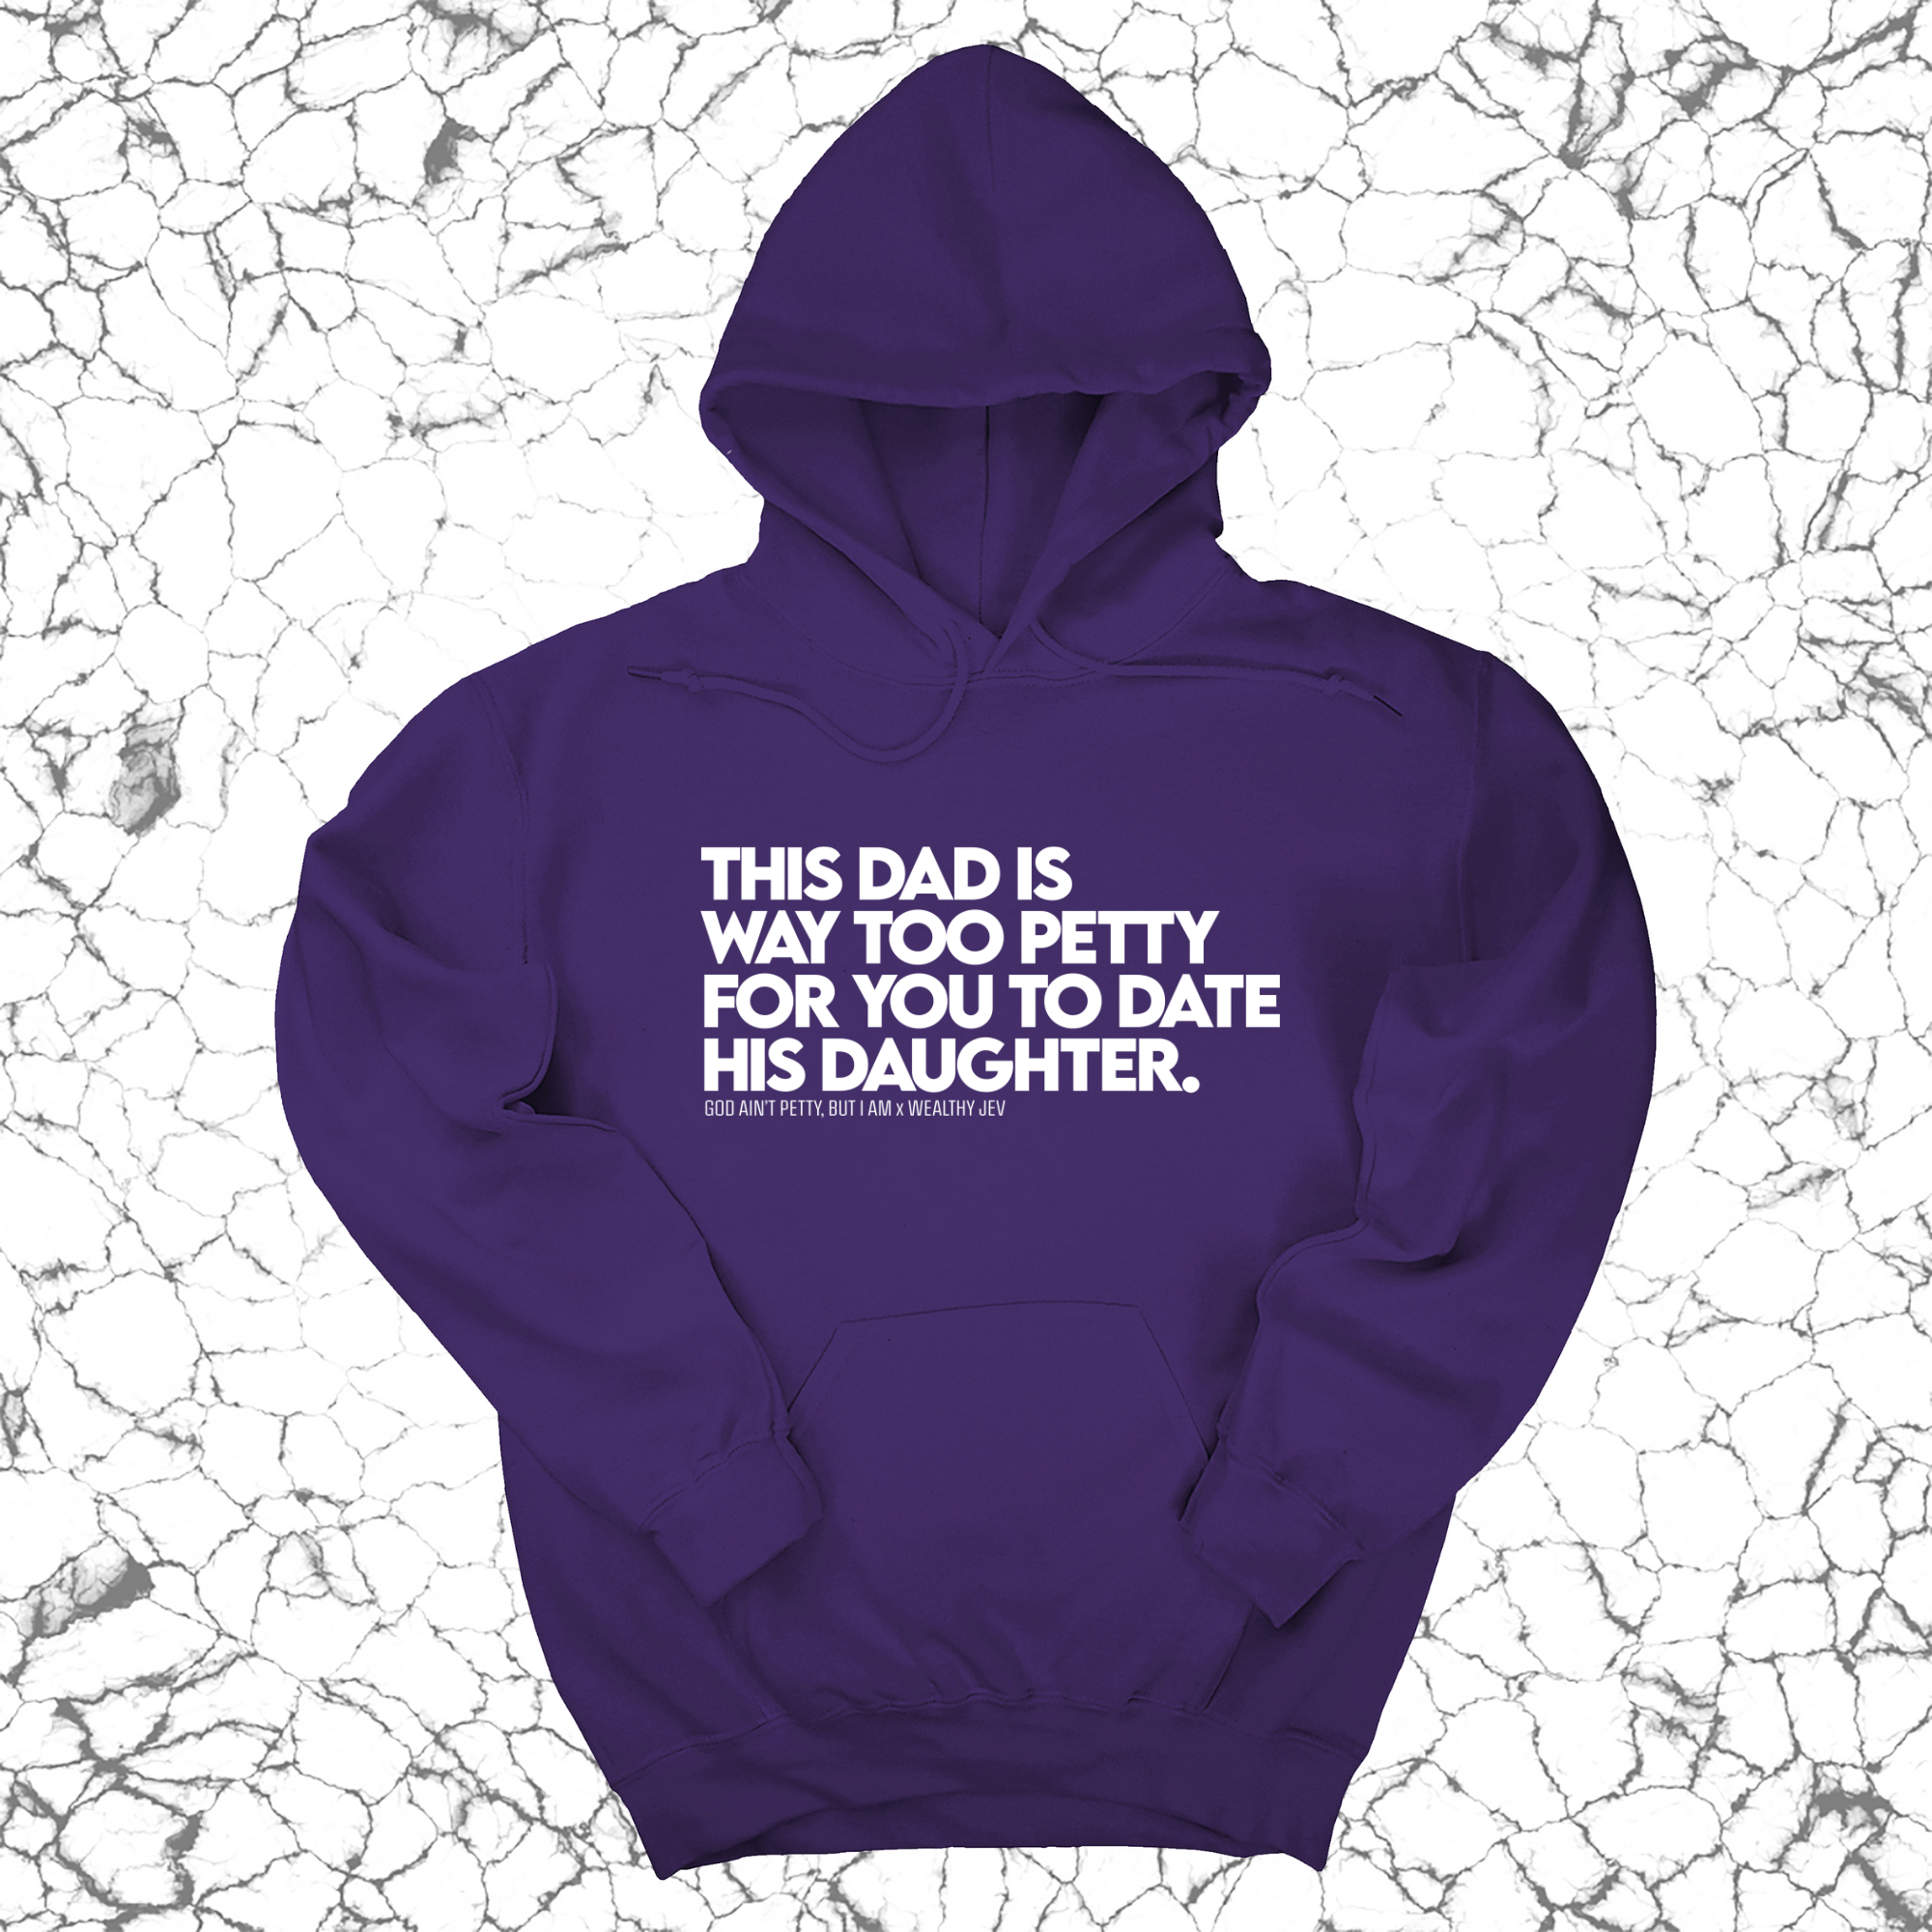 This Dad is way too petty for you to date his daughter Unisex Hoodie (God Ain't Petty, but I Am x Wealthy Jev Collab)-Hoodie-The Original God Ain't Petty But I Am